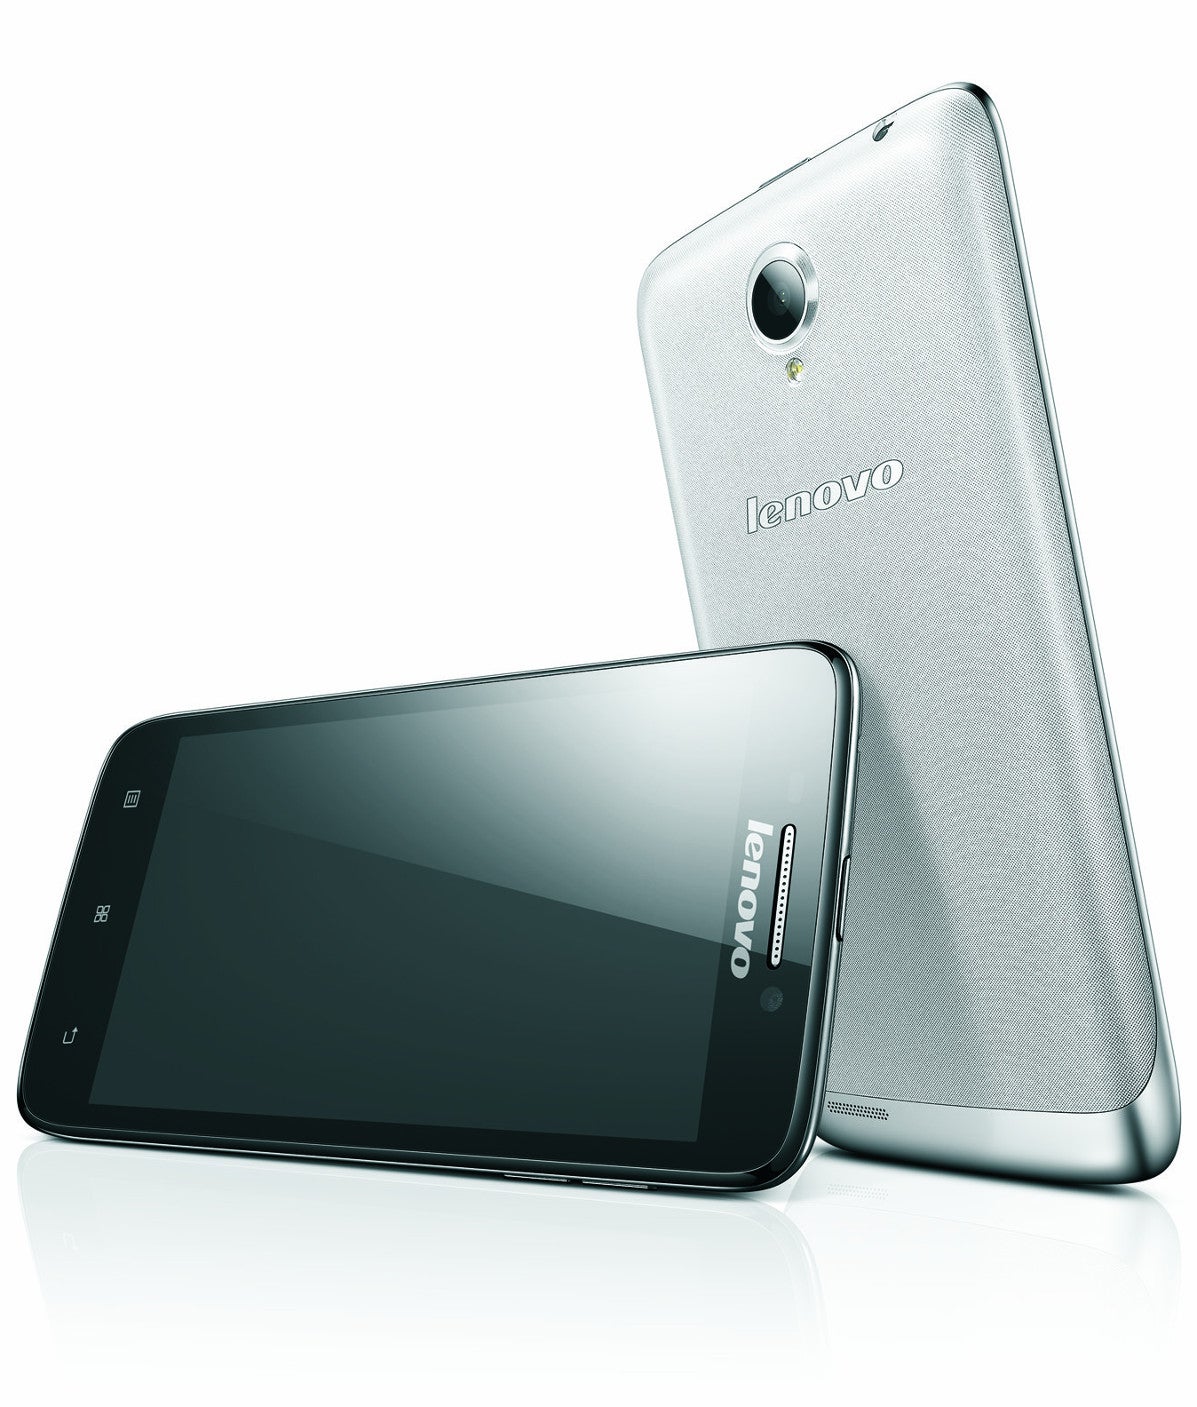 Lenovo S650 - Lenovo introduces the 6-inch S930, the 4.7-inch S650, and a 5-inch A859